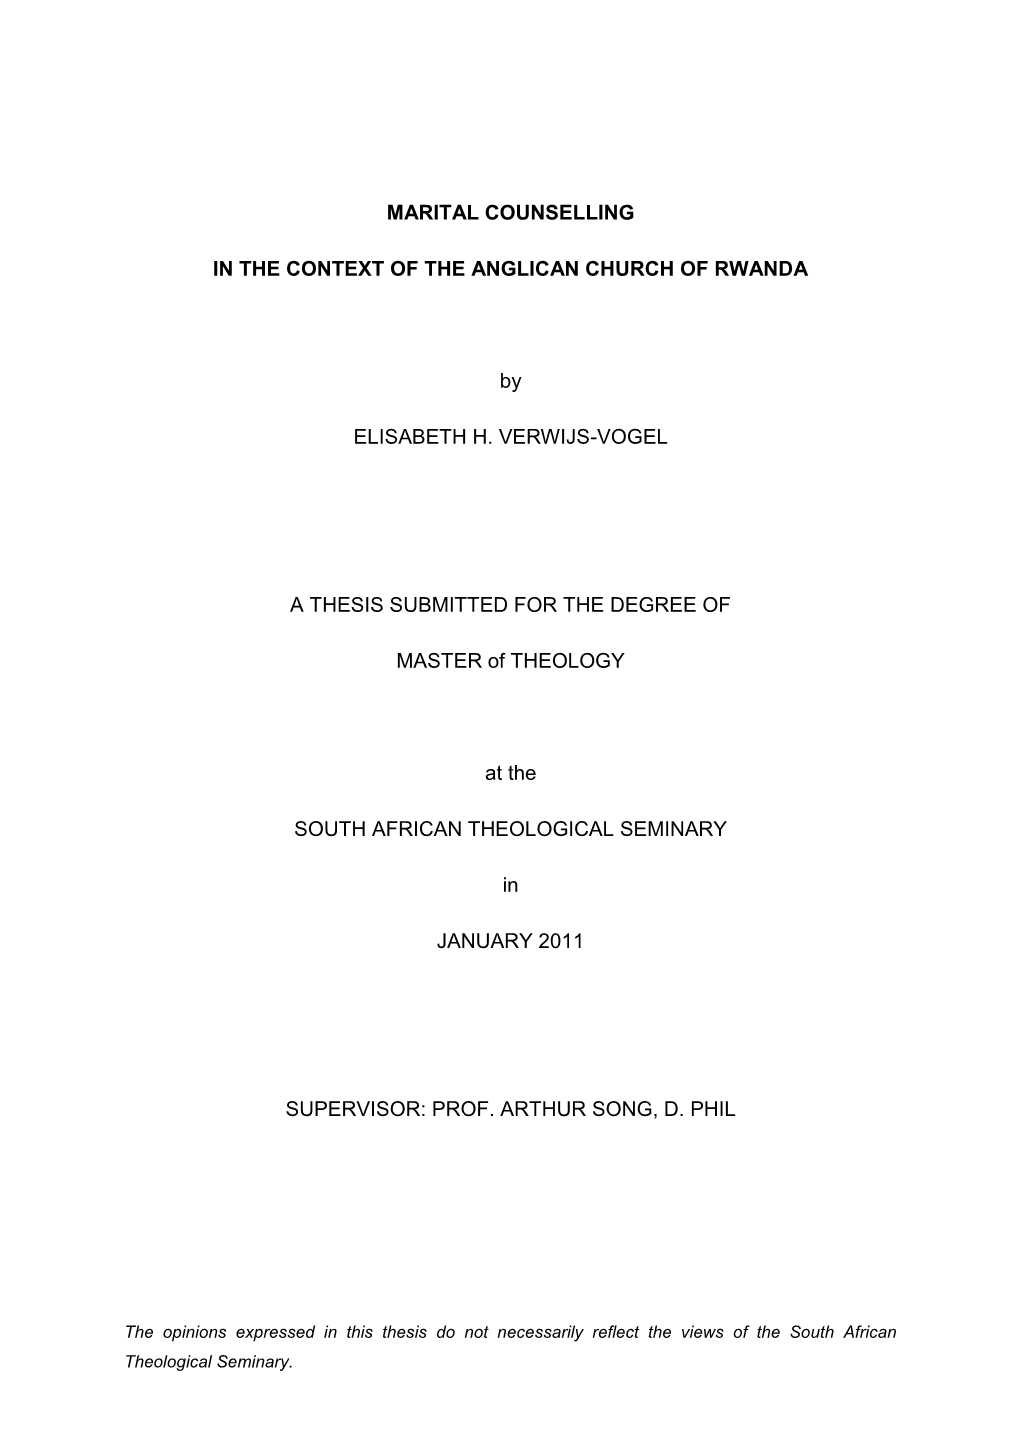 MARITAL COUNSELLING in the CONTEXT of the ANGLICAN CHURCH of RWANDA by ELISABETH H. VERWIJS-VOGEL a THESIS SUBMITTED for the DE